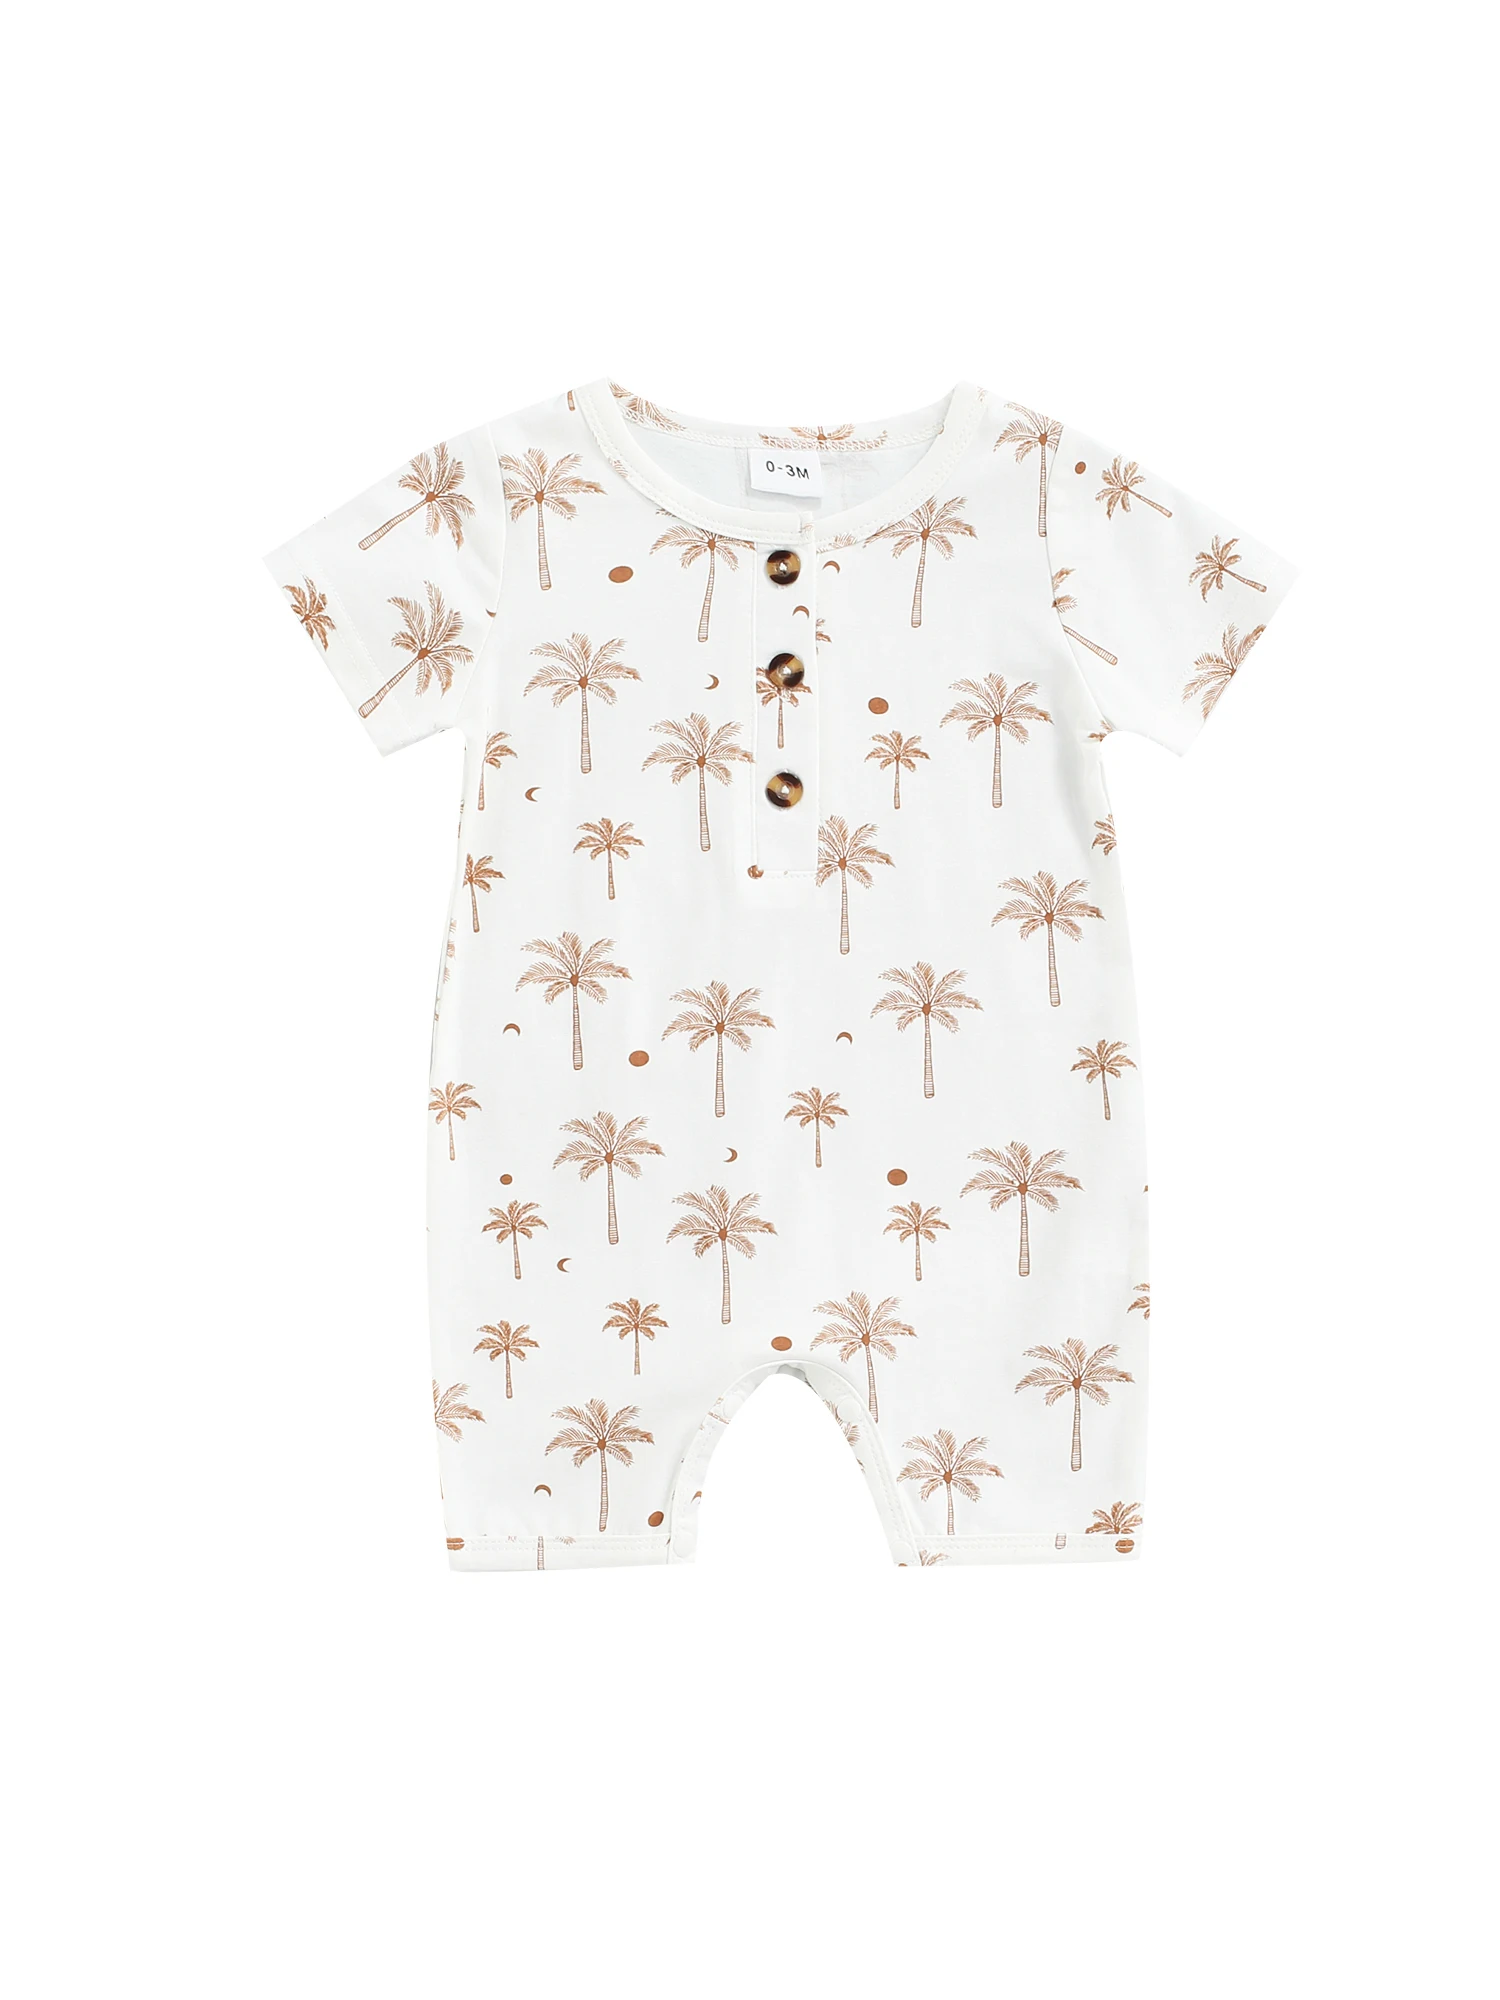 Succulent Baby Romper with Matching HatHeadband